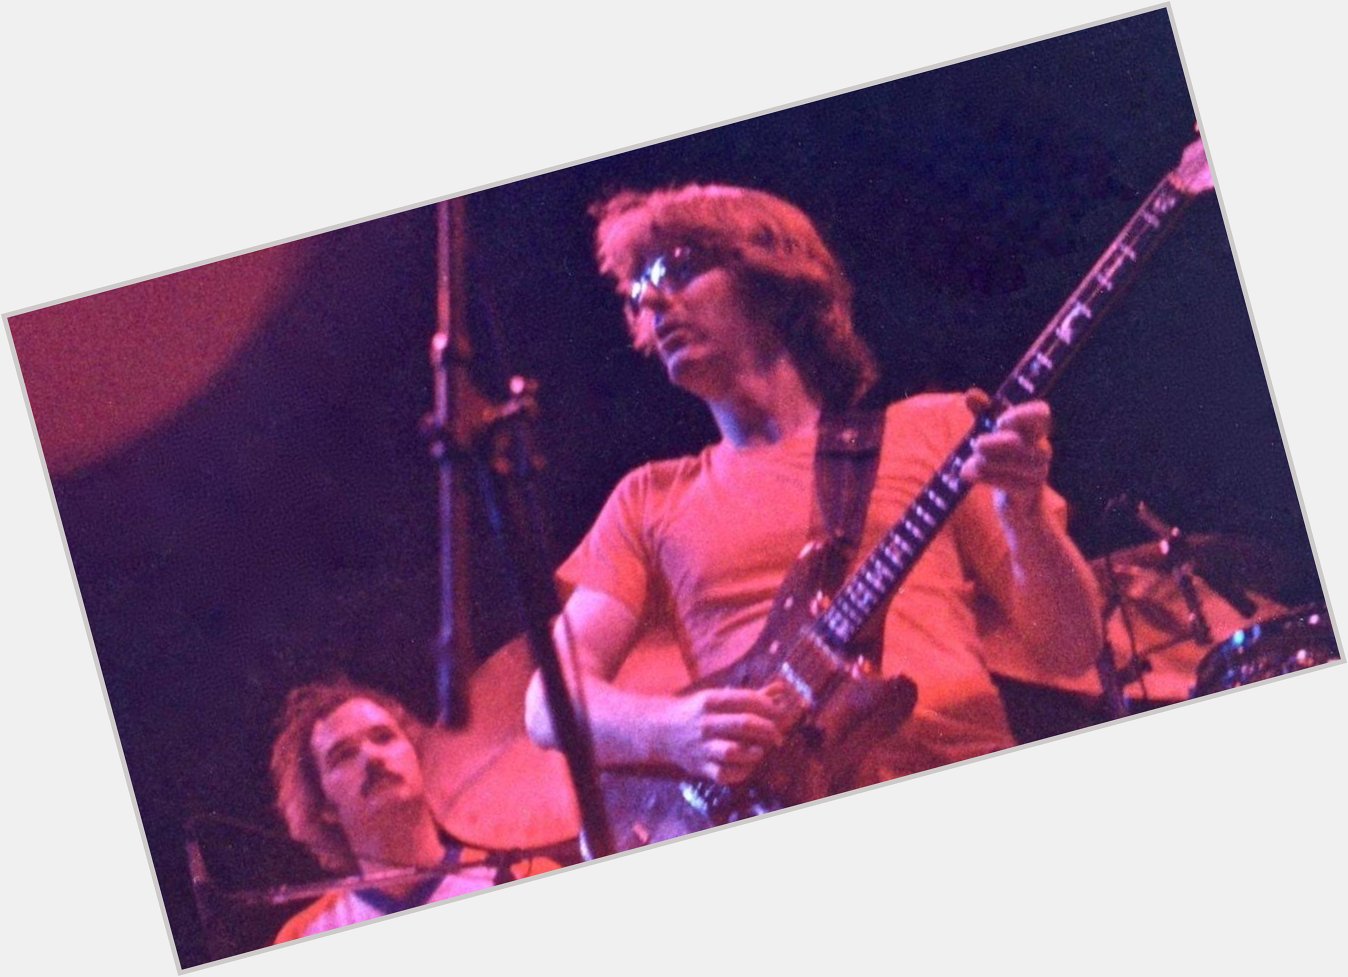  Happy Birthday Phil Lesh: Grateful Dead Highlights From 1978 